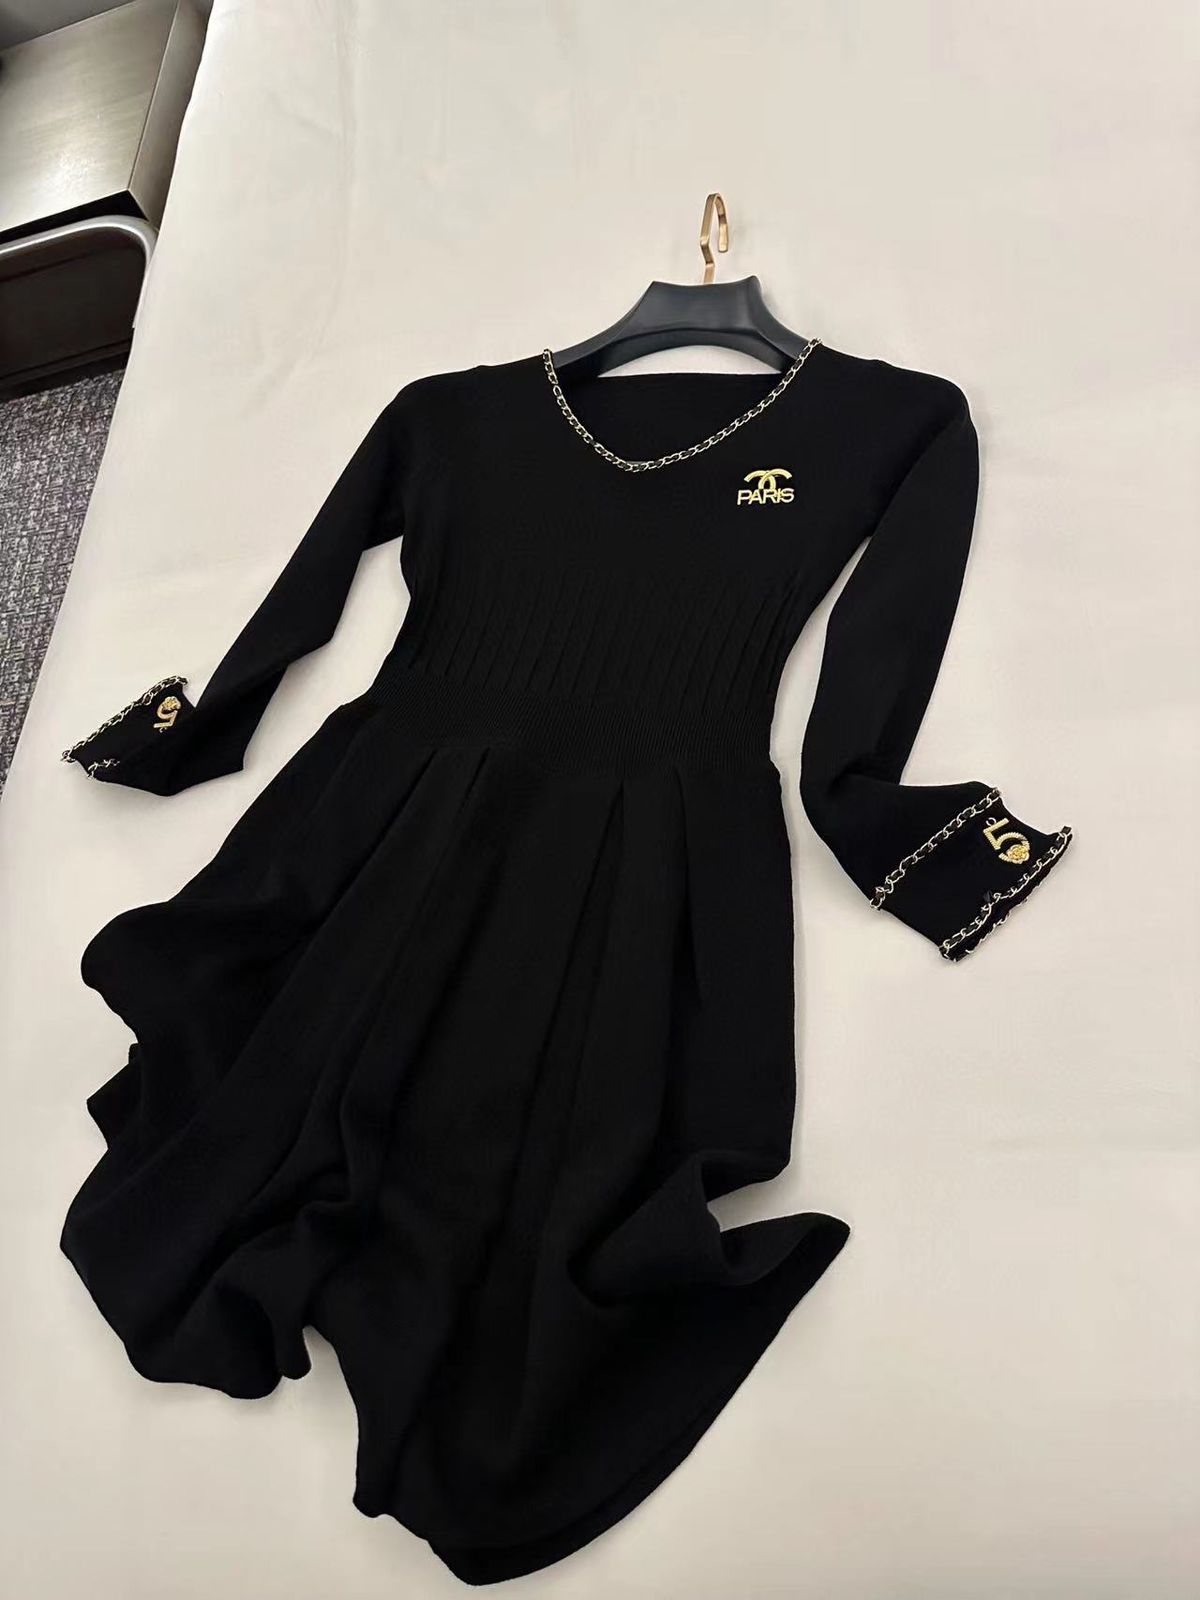 CHANEL HIGH QUALITY BLACK PARTYWEAR DRESS FOR HER